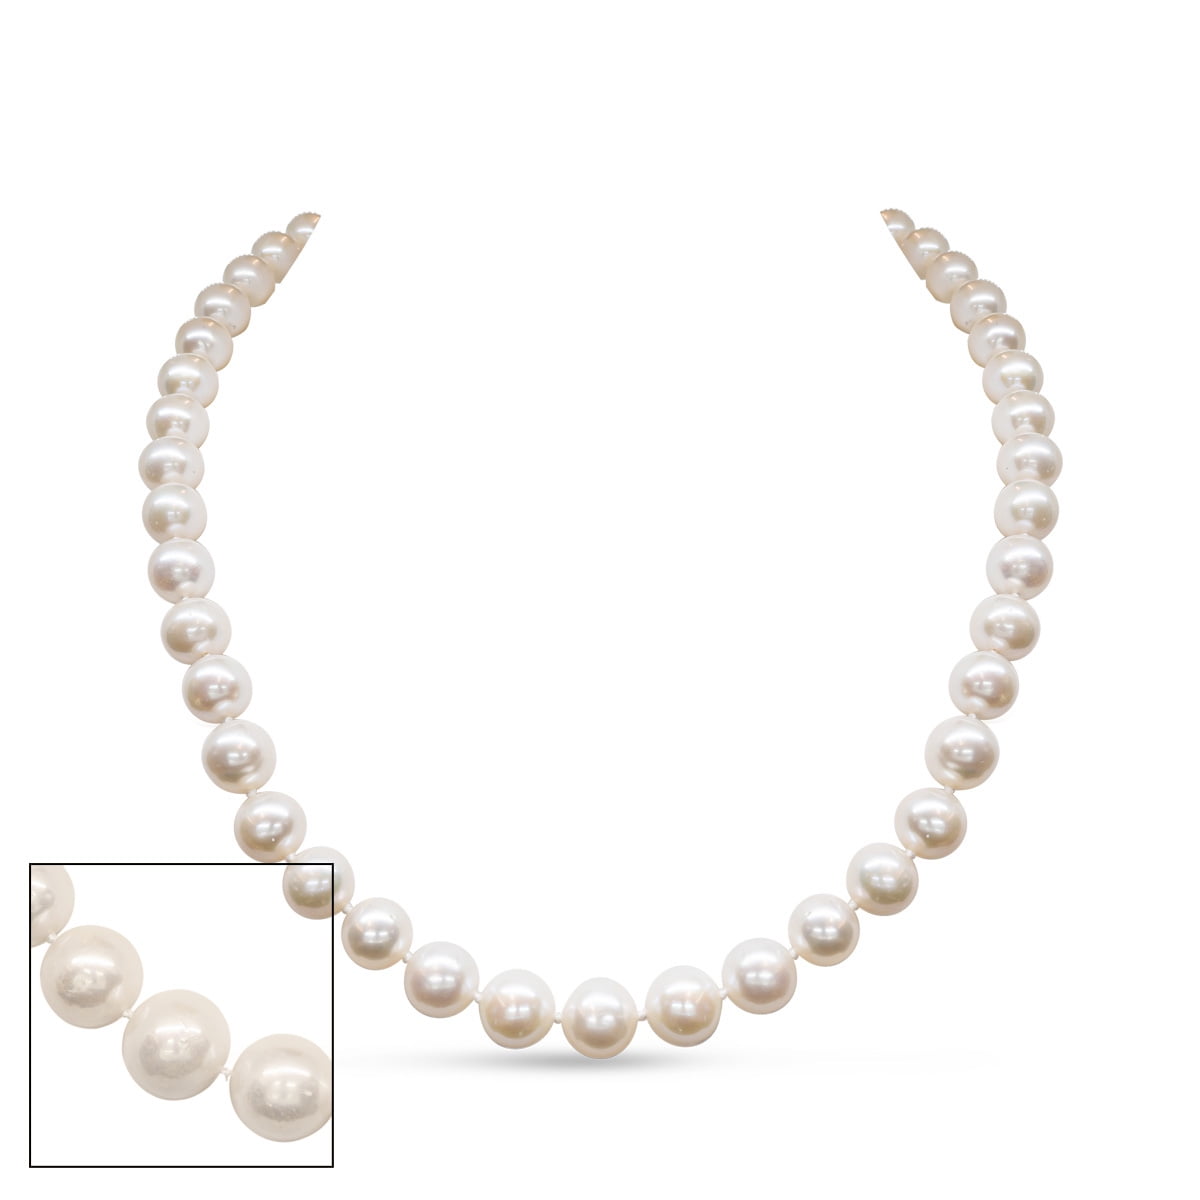 Quality 8mm Black Cultured Freshwater Pearl Necklace 18 JYX Pearl Double Strand Necklace AA 